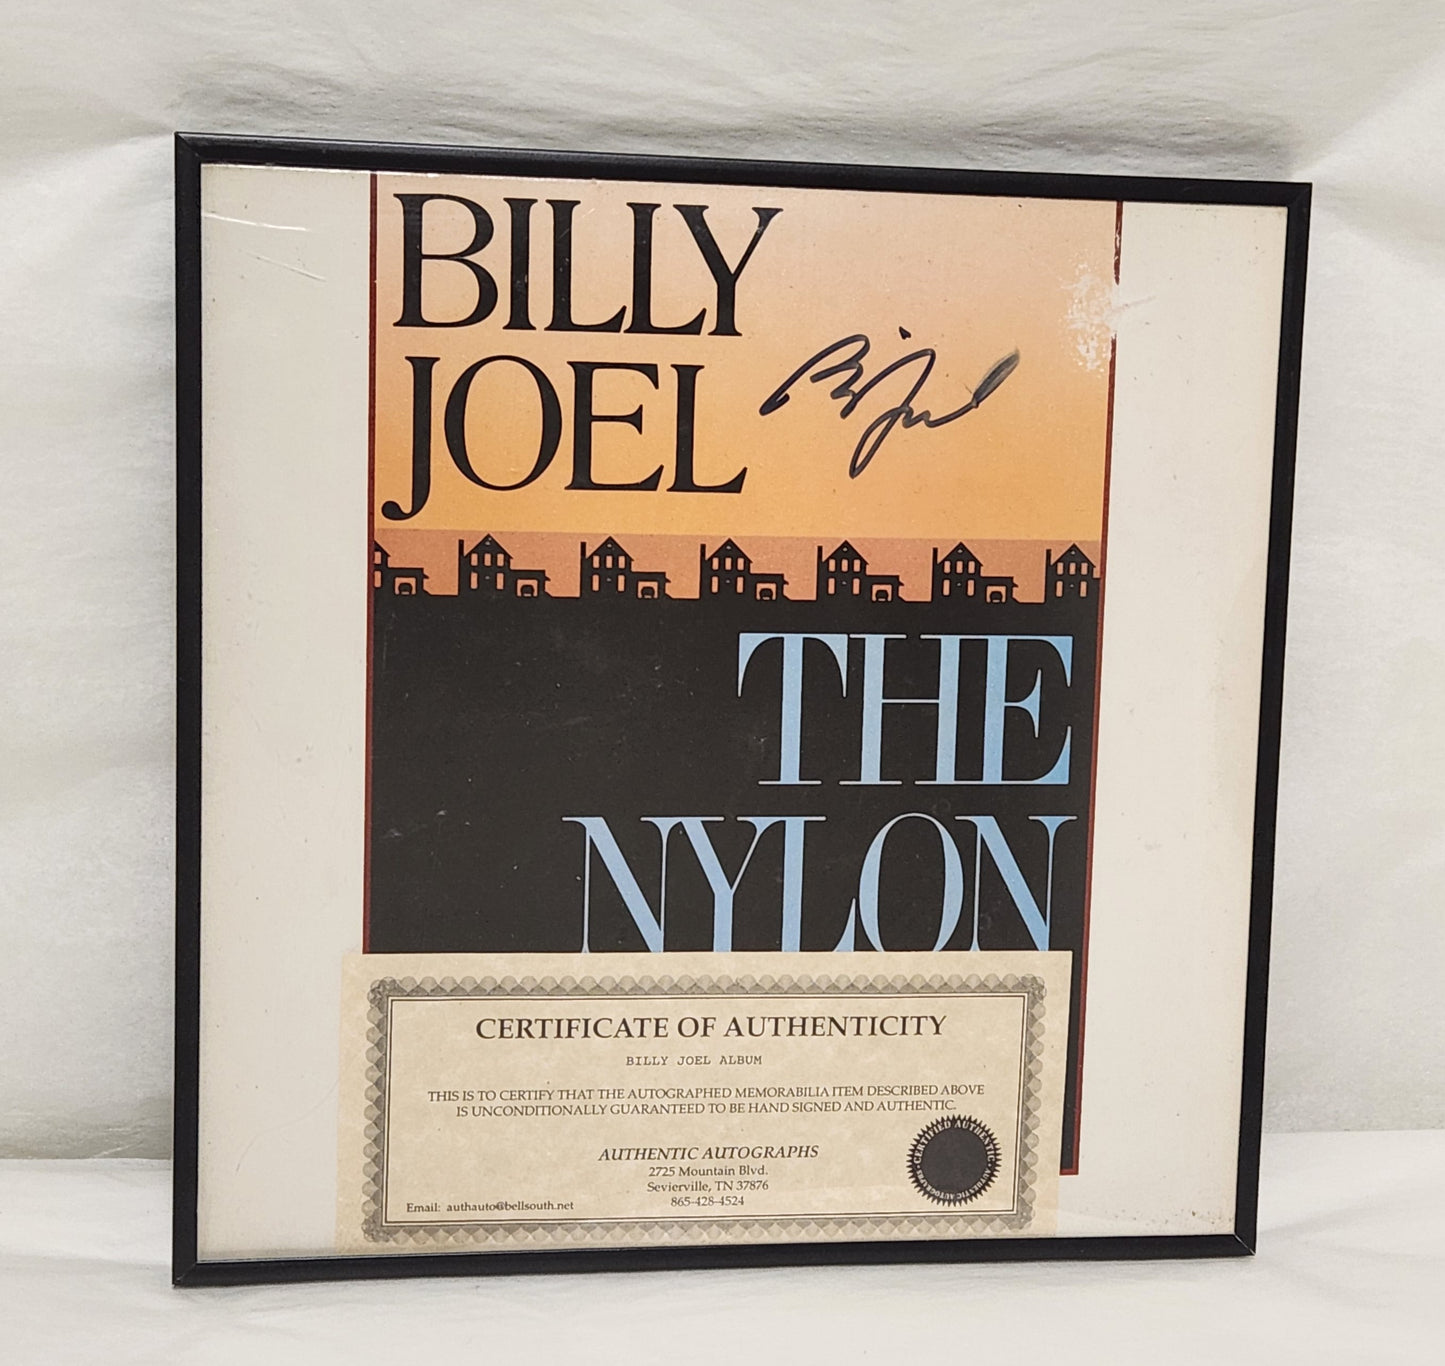 Billy Joel Autographed "Nylon Curtain" 1982 Framed Record Album with COA